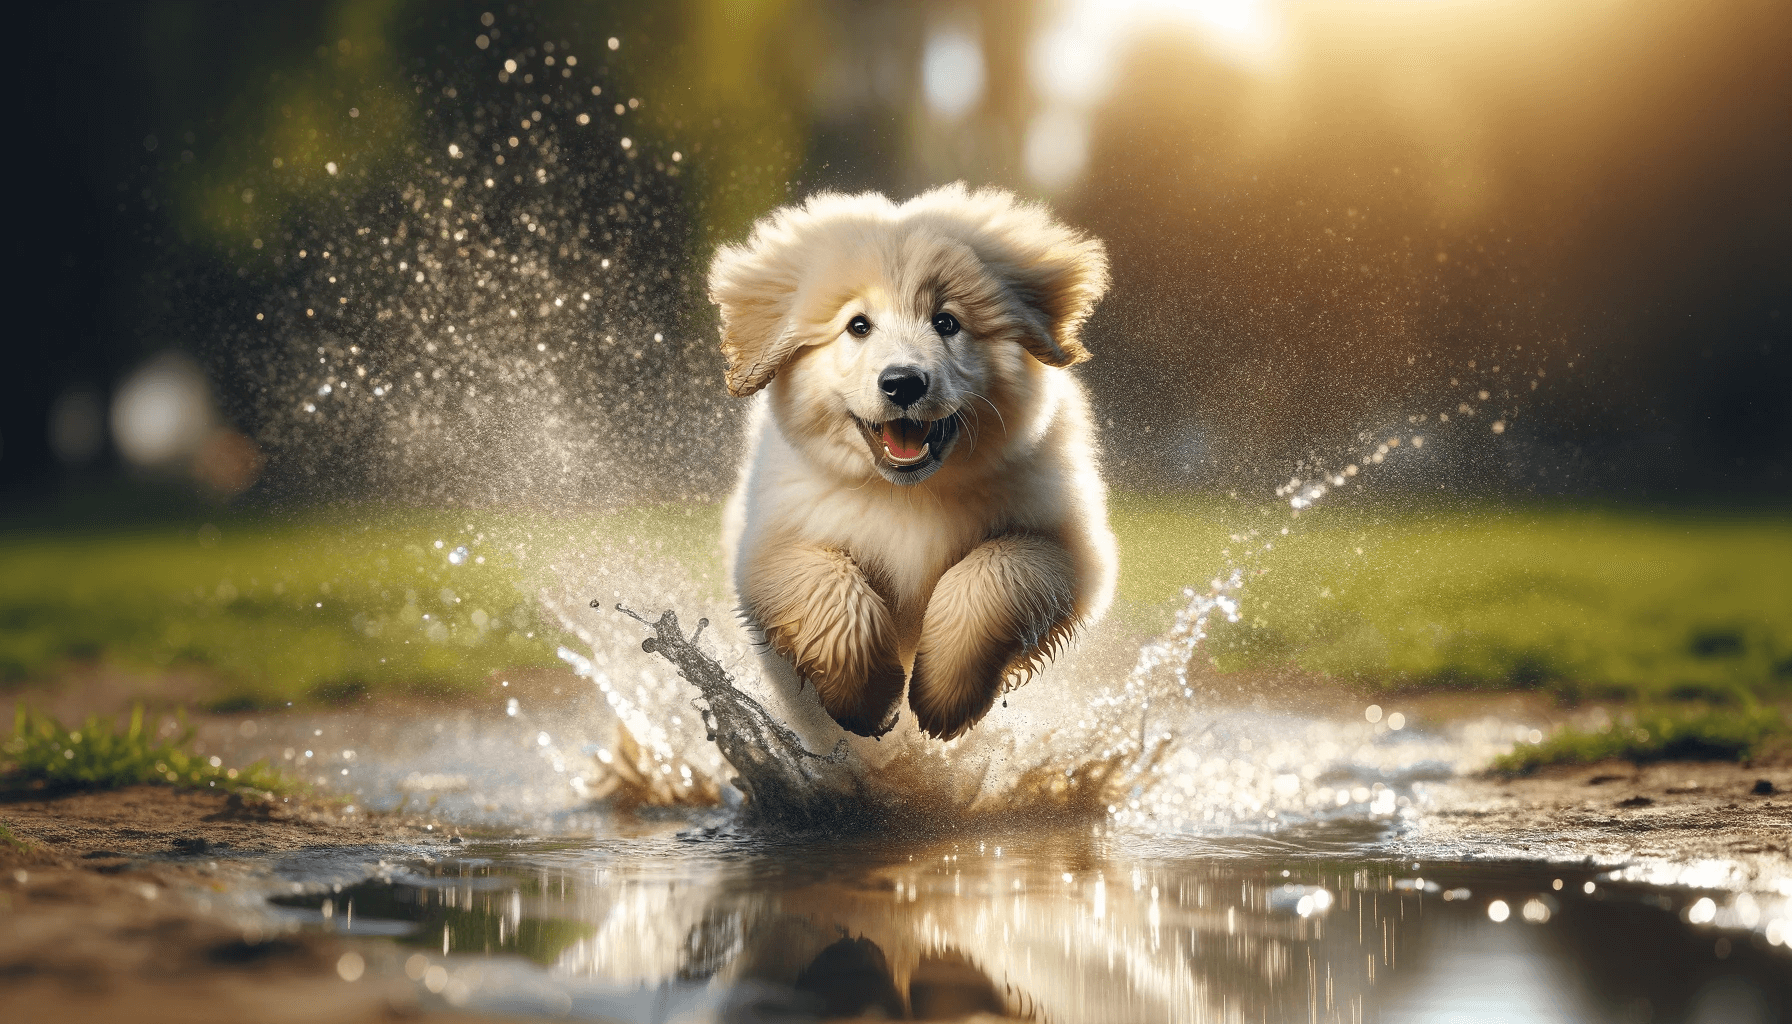 A Pyrenees Lab Mix puppy is captured in mid-leap, its fluffy light cream coat billowing as it bounds through a splash in a shallow puddle. Water dropl